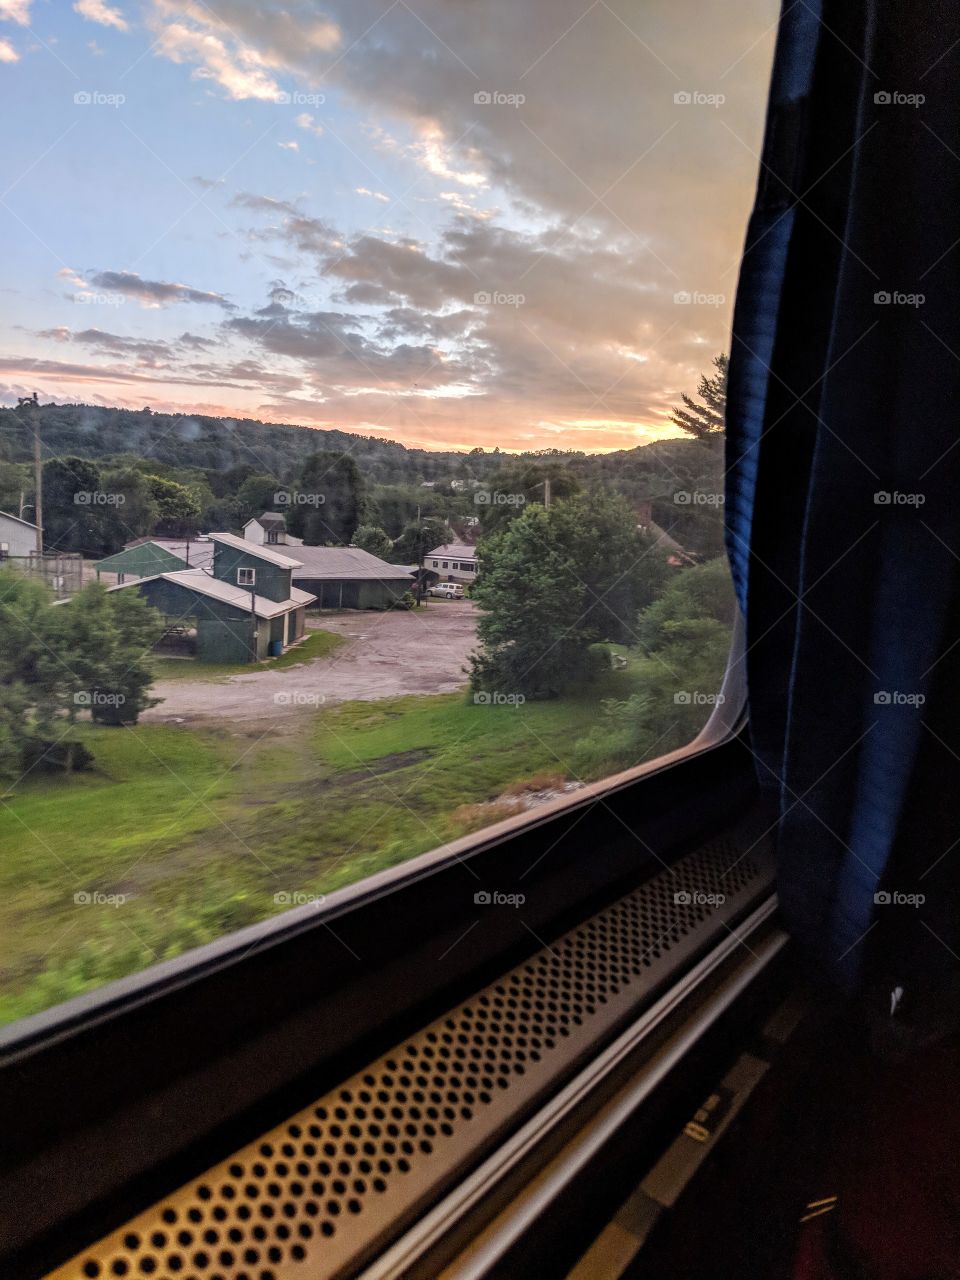 the  scenery on the train